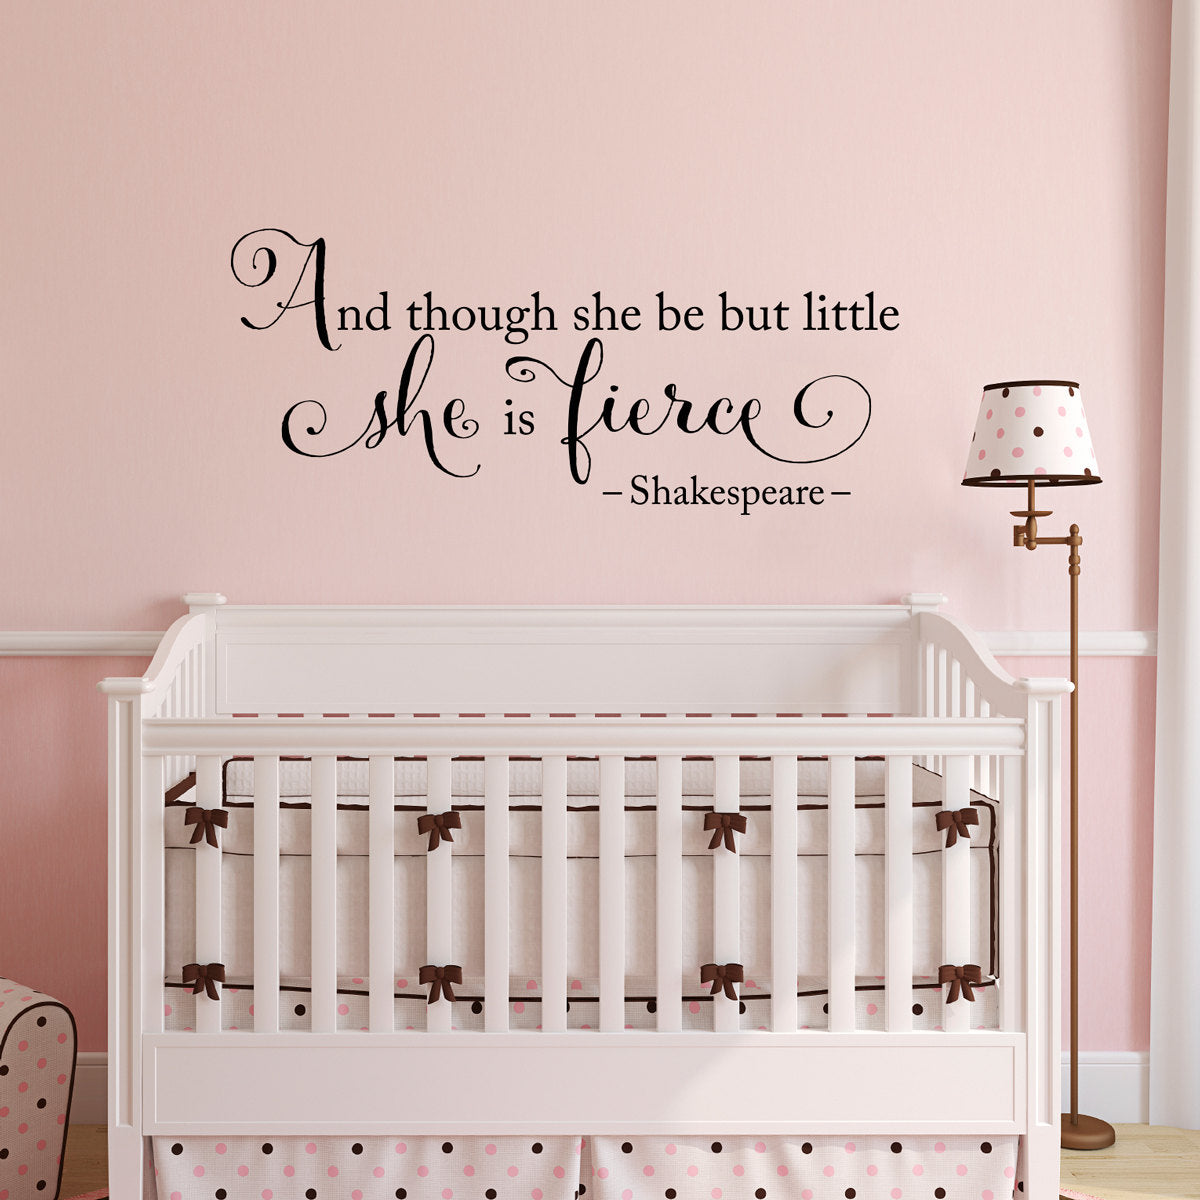 She is fierce Wall Decal - though she be but little - Baby Girl Nursery Decal - Shakespeare quote - distressed script font